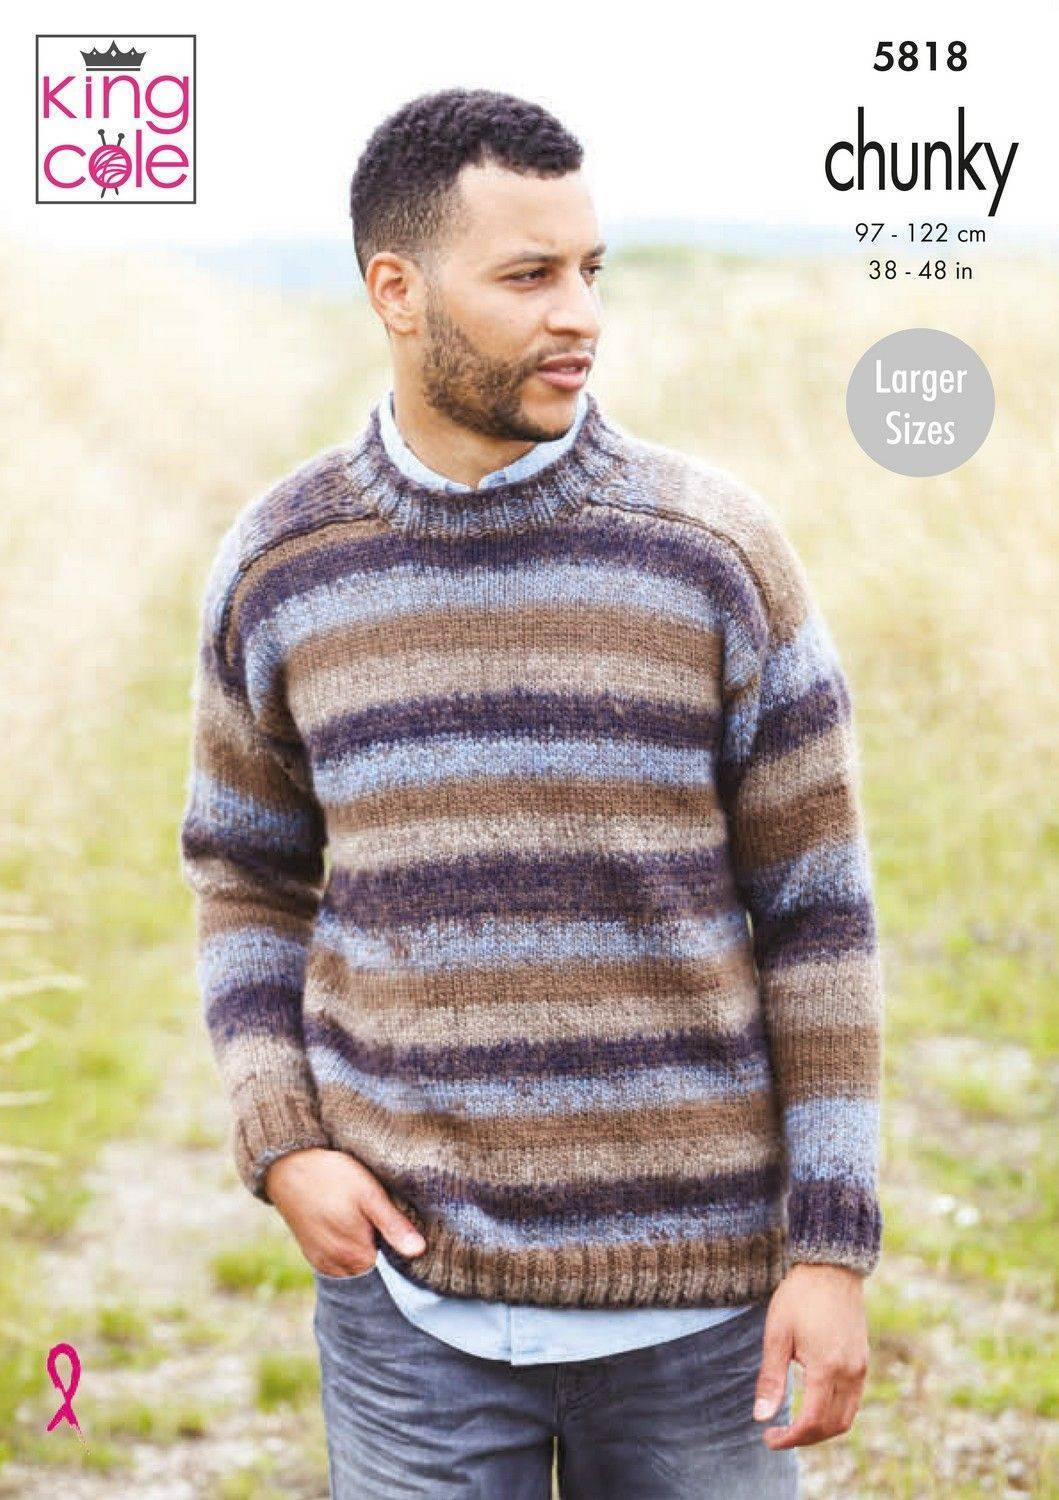 Sweaters in King Cole Autumn Chunky (5818) | The Knitting Network